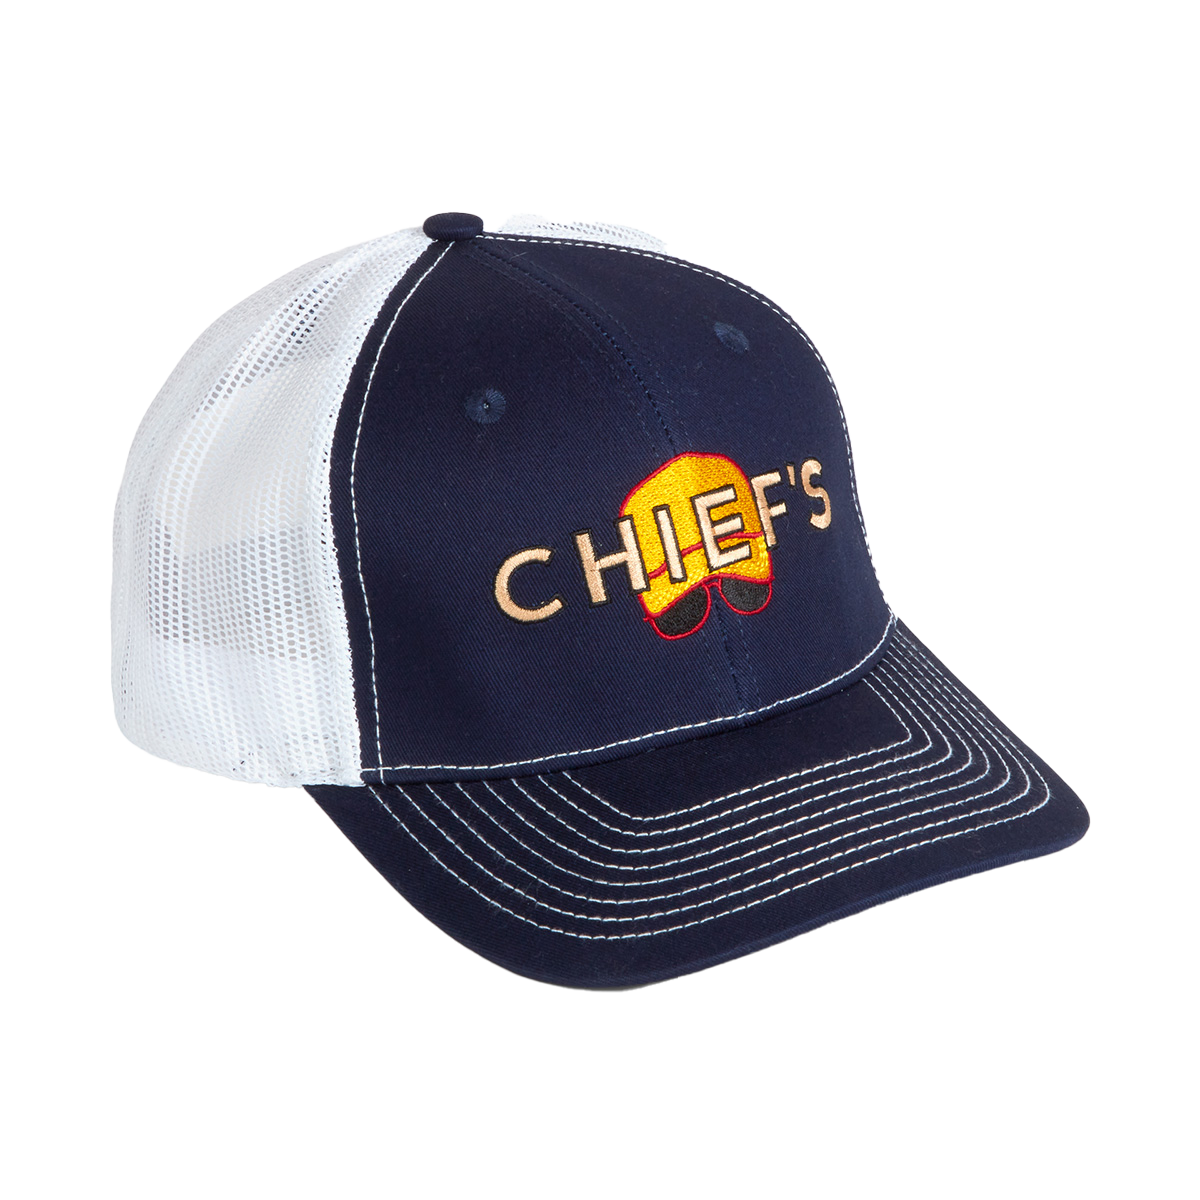 Chief's Marquee Hat - Navy